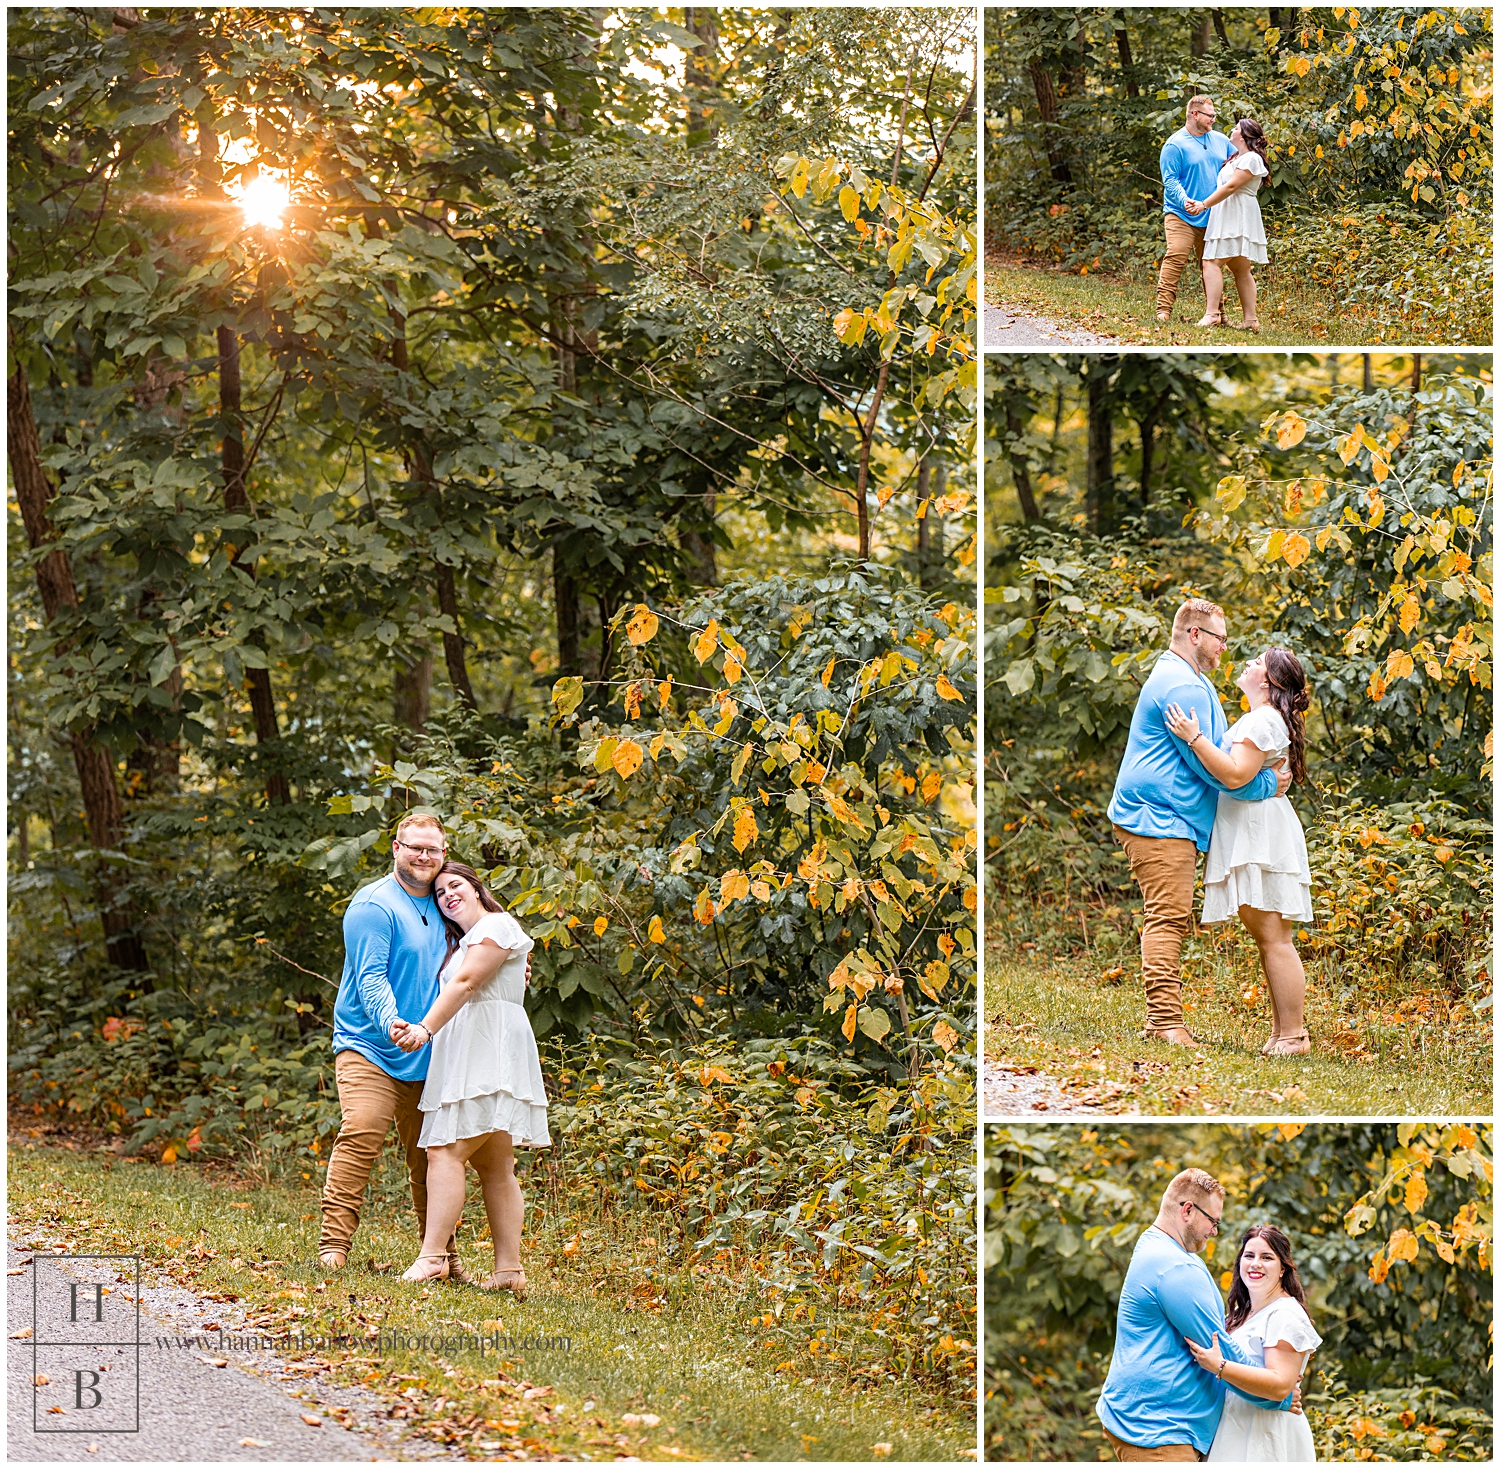 Fall engagement photos of man in blue shirt and woman in white dress